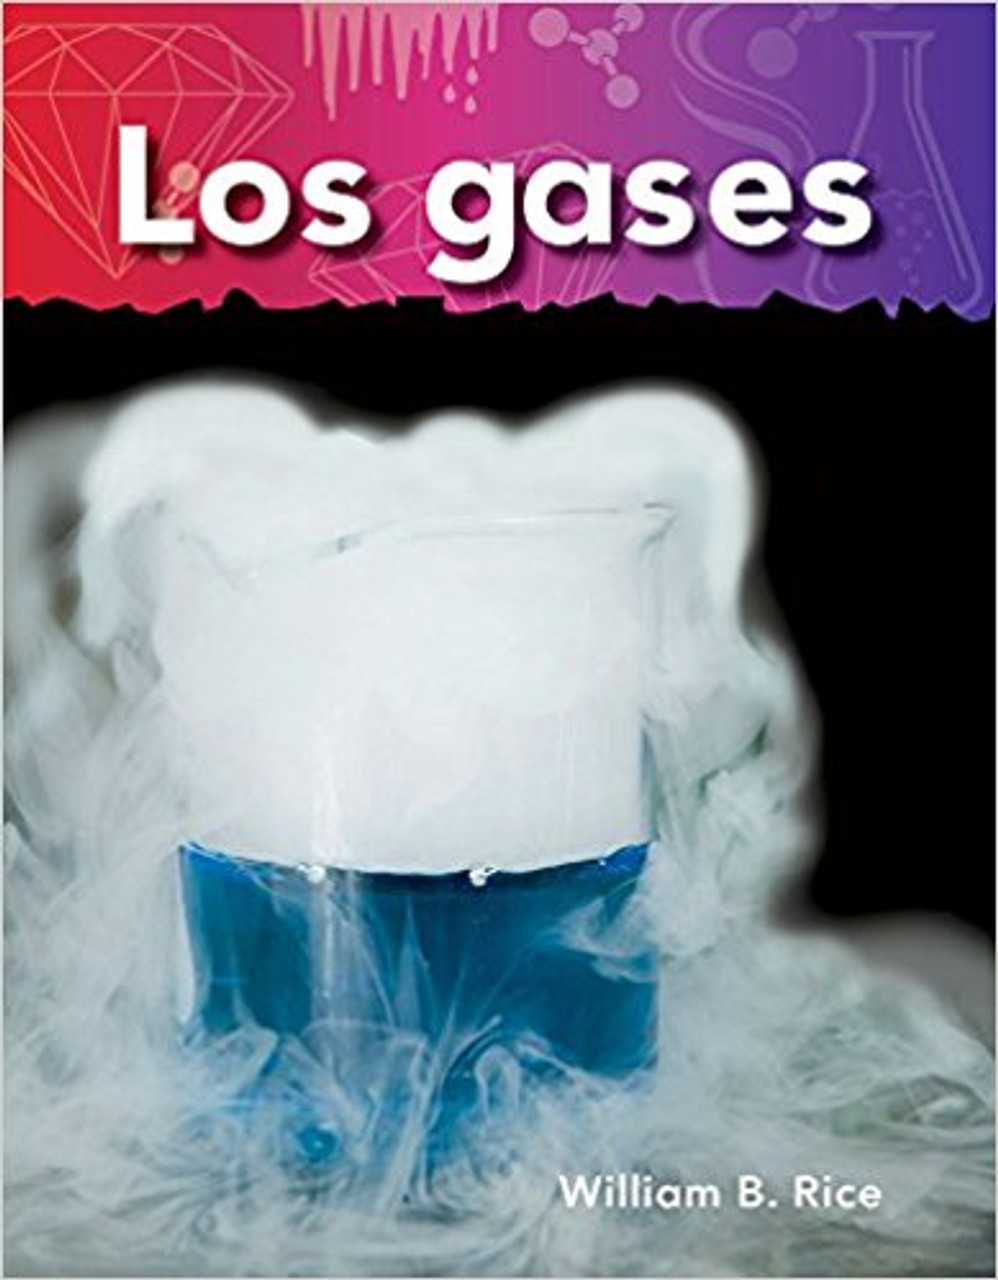 Los gases (Gases) by William B Rice